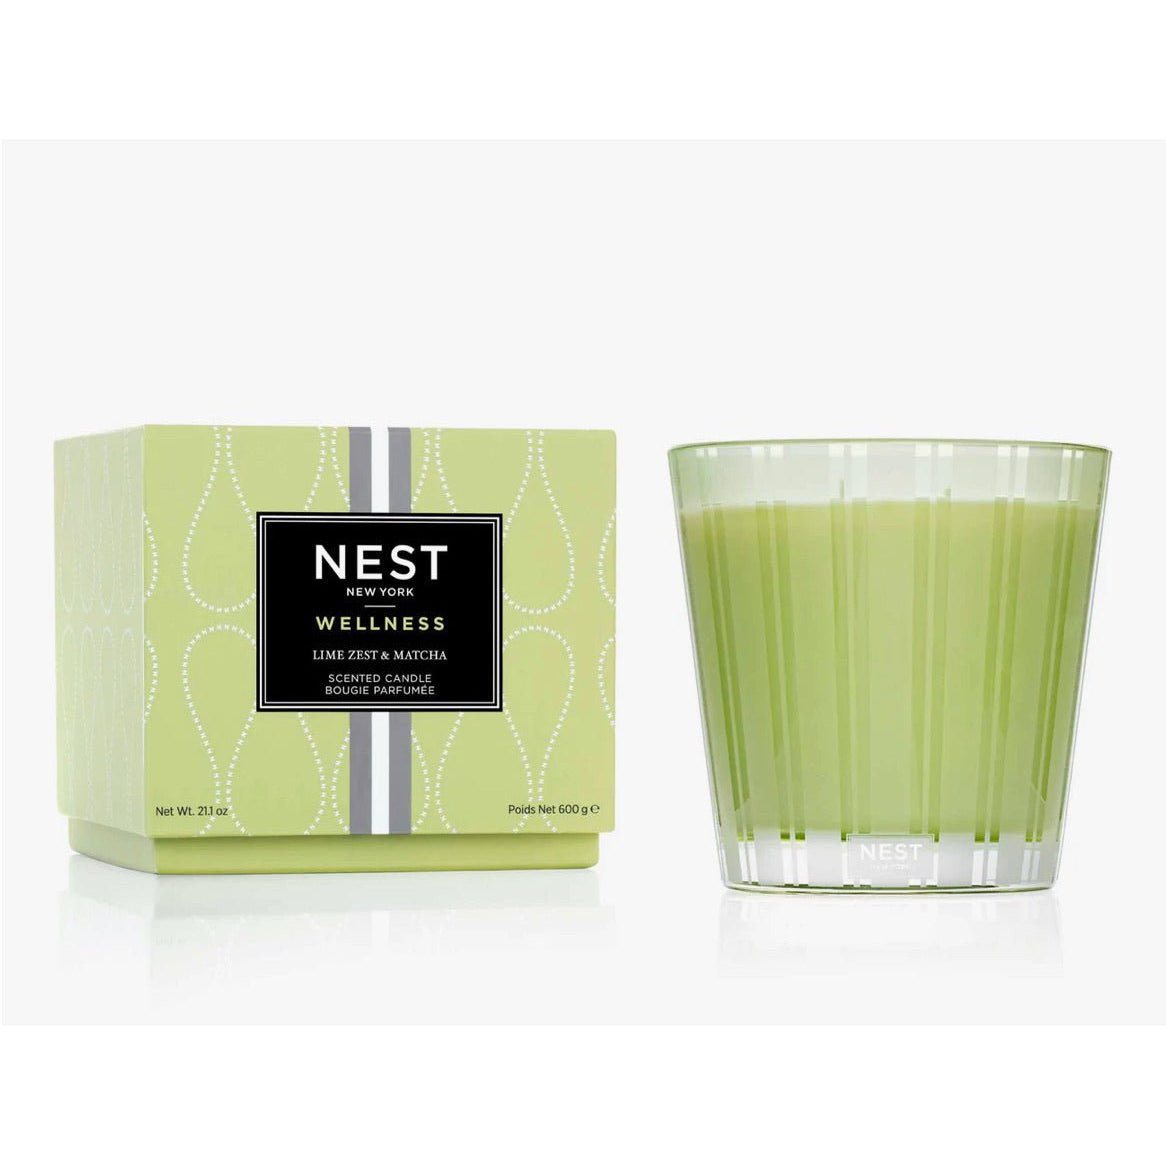 Nest New York 3-Wick Candle, 21.2 oz in Lime Zest and Matcha